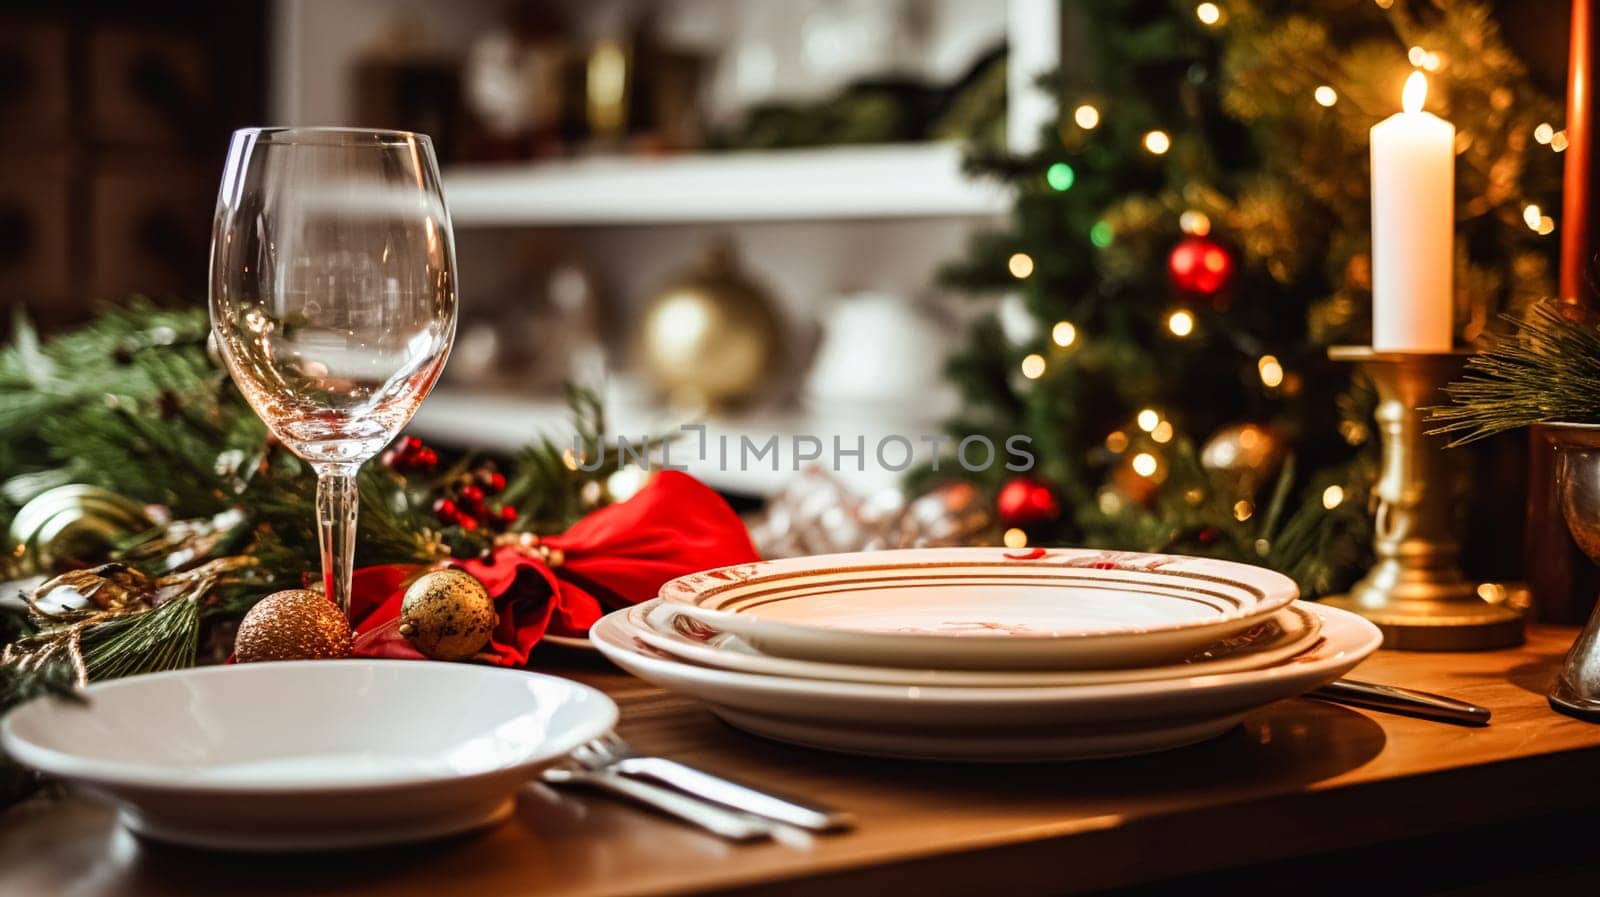 Dishware and crockery set for winter holiday family dinner, Christmas homeware decor for holidays in the English country house, gift set and home styling inspiration